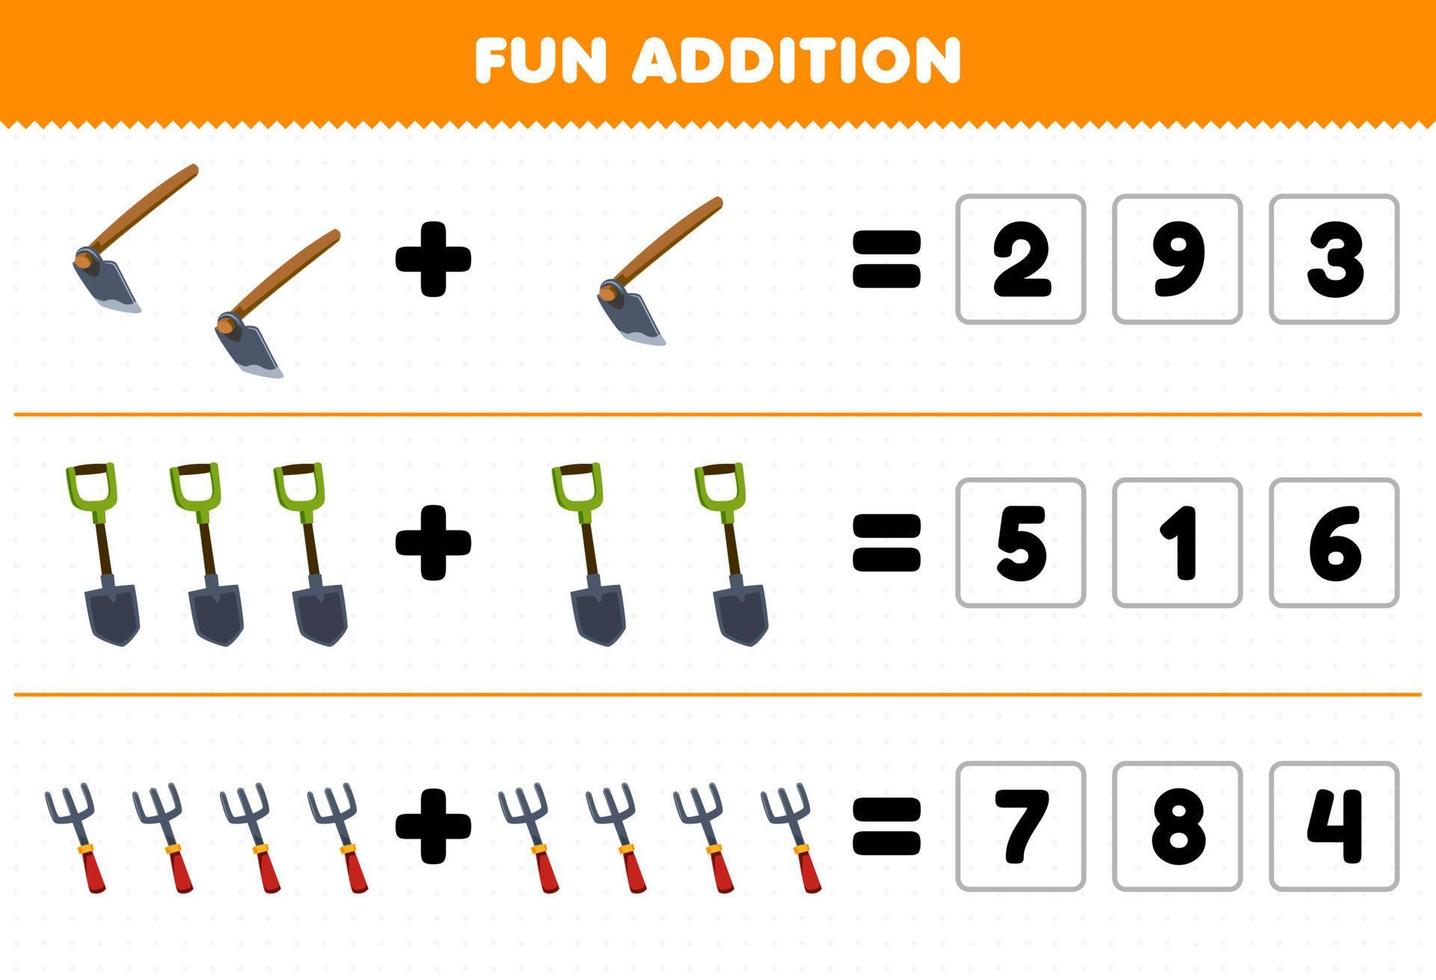 Education game for children fun addition by guess the correct number of cute cartoon hoe shovel fork picture printable tool worksheet vector